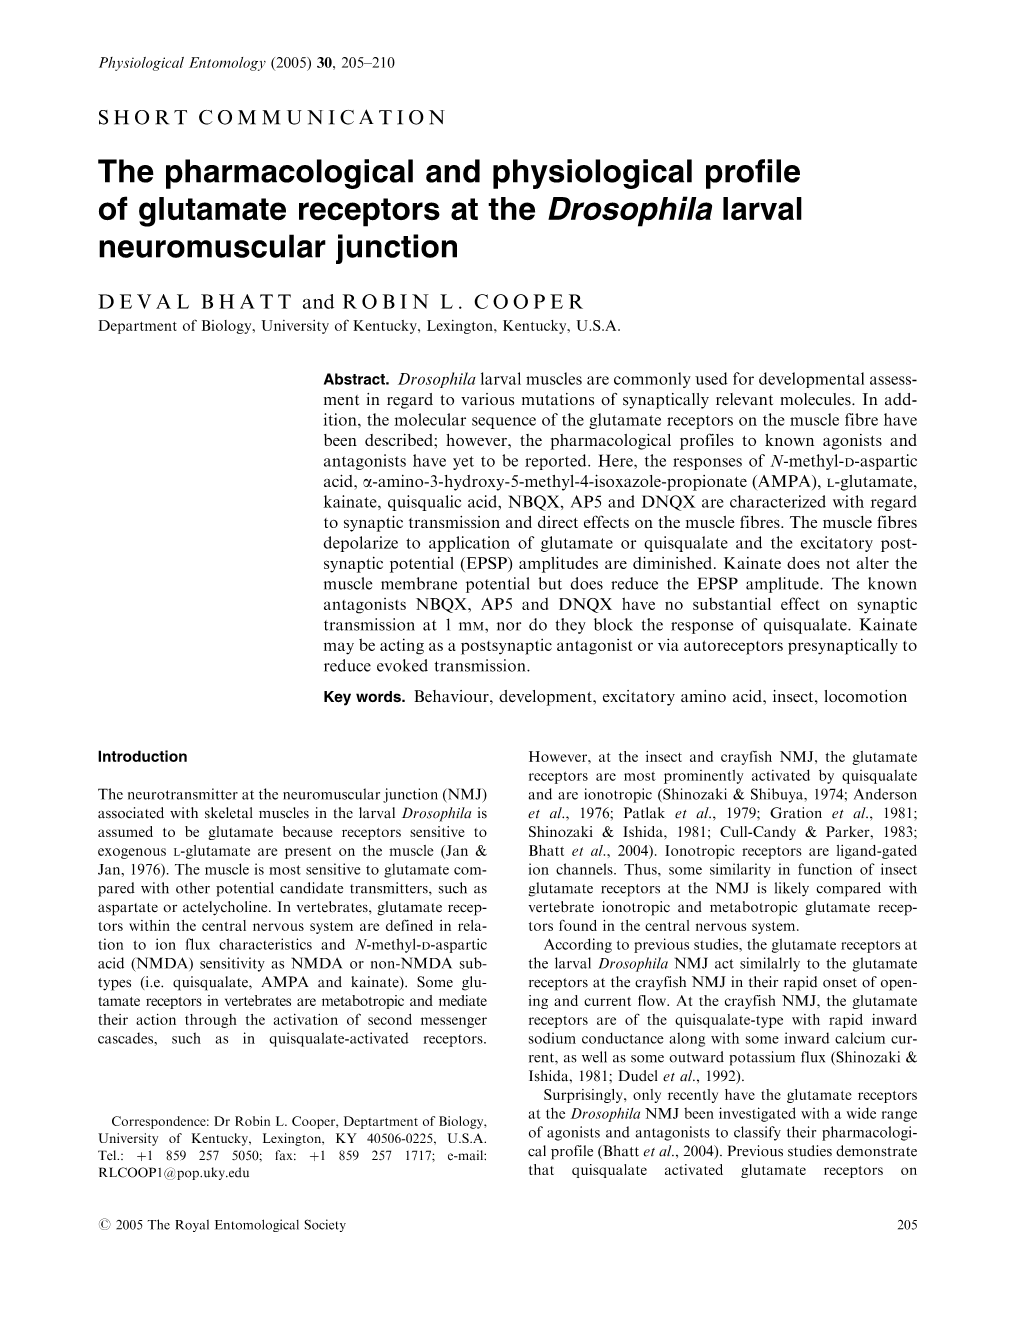 The Pharmacological and Physiological Profile of Glutamate Receptors at the Drosophila Larval Neuromuscular Junction